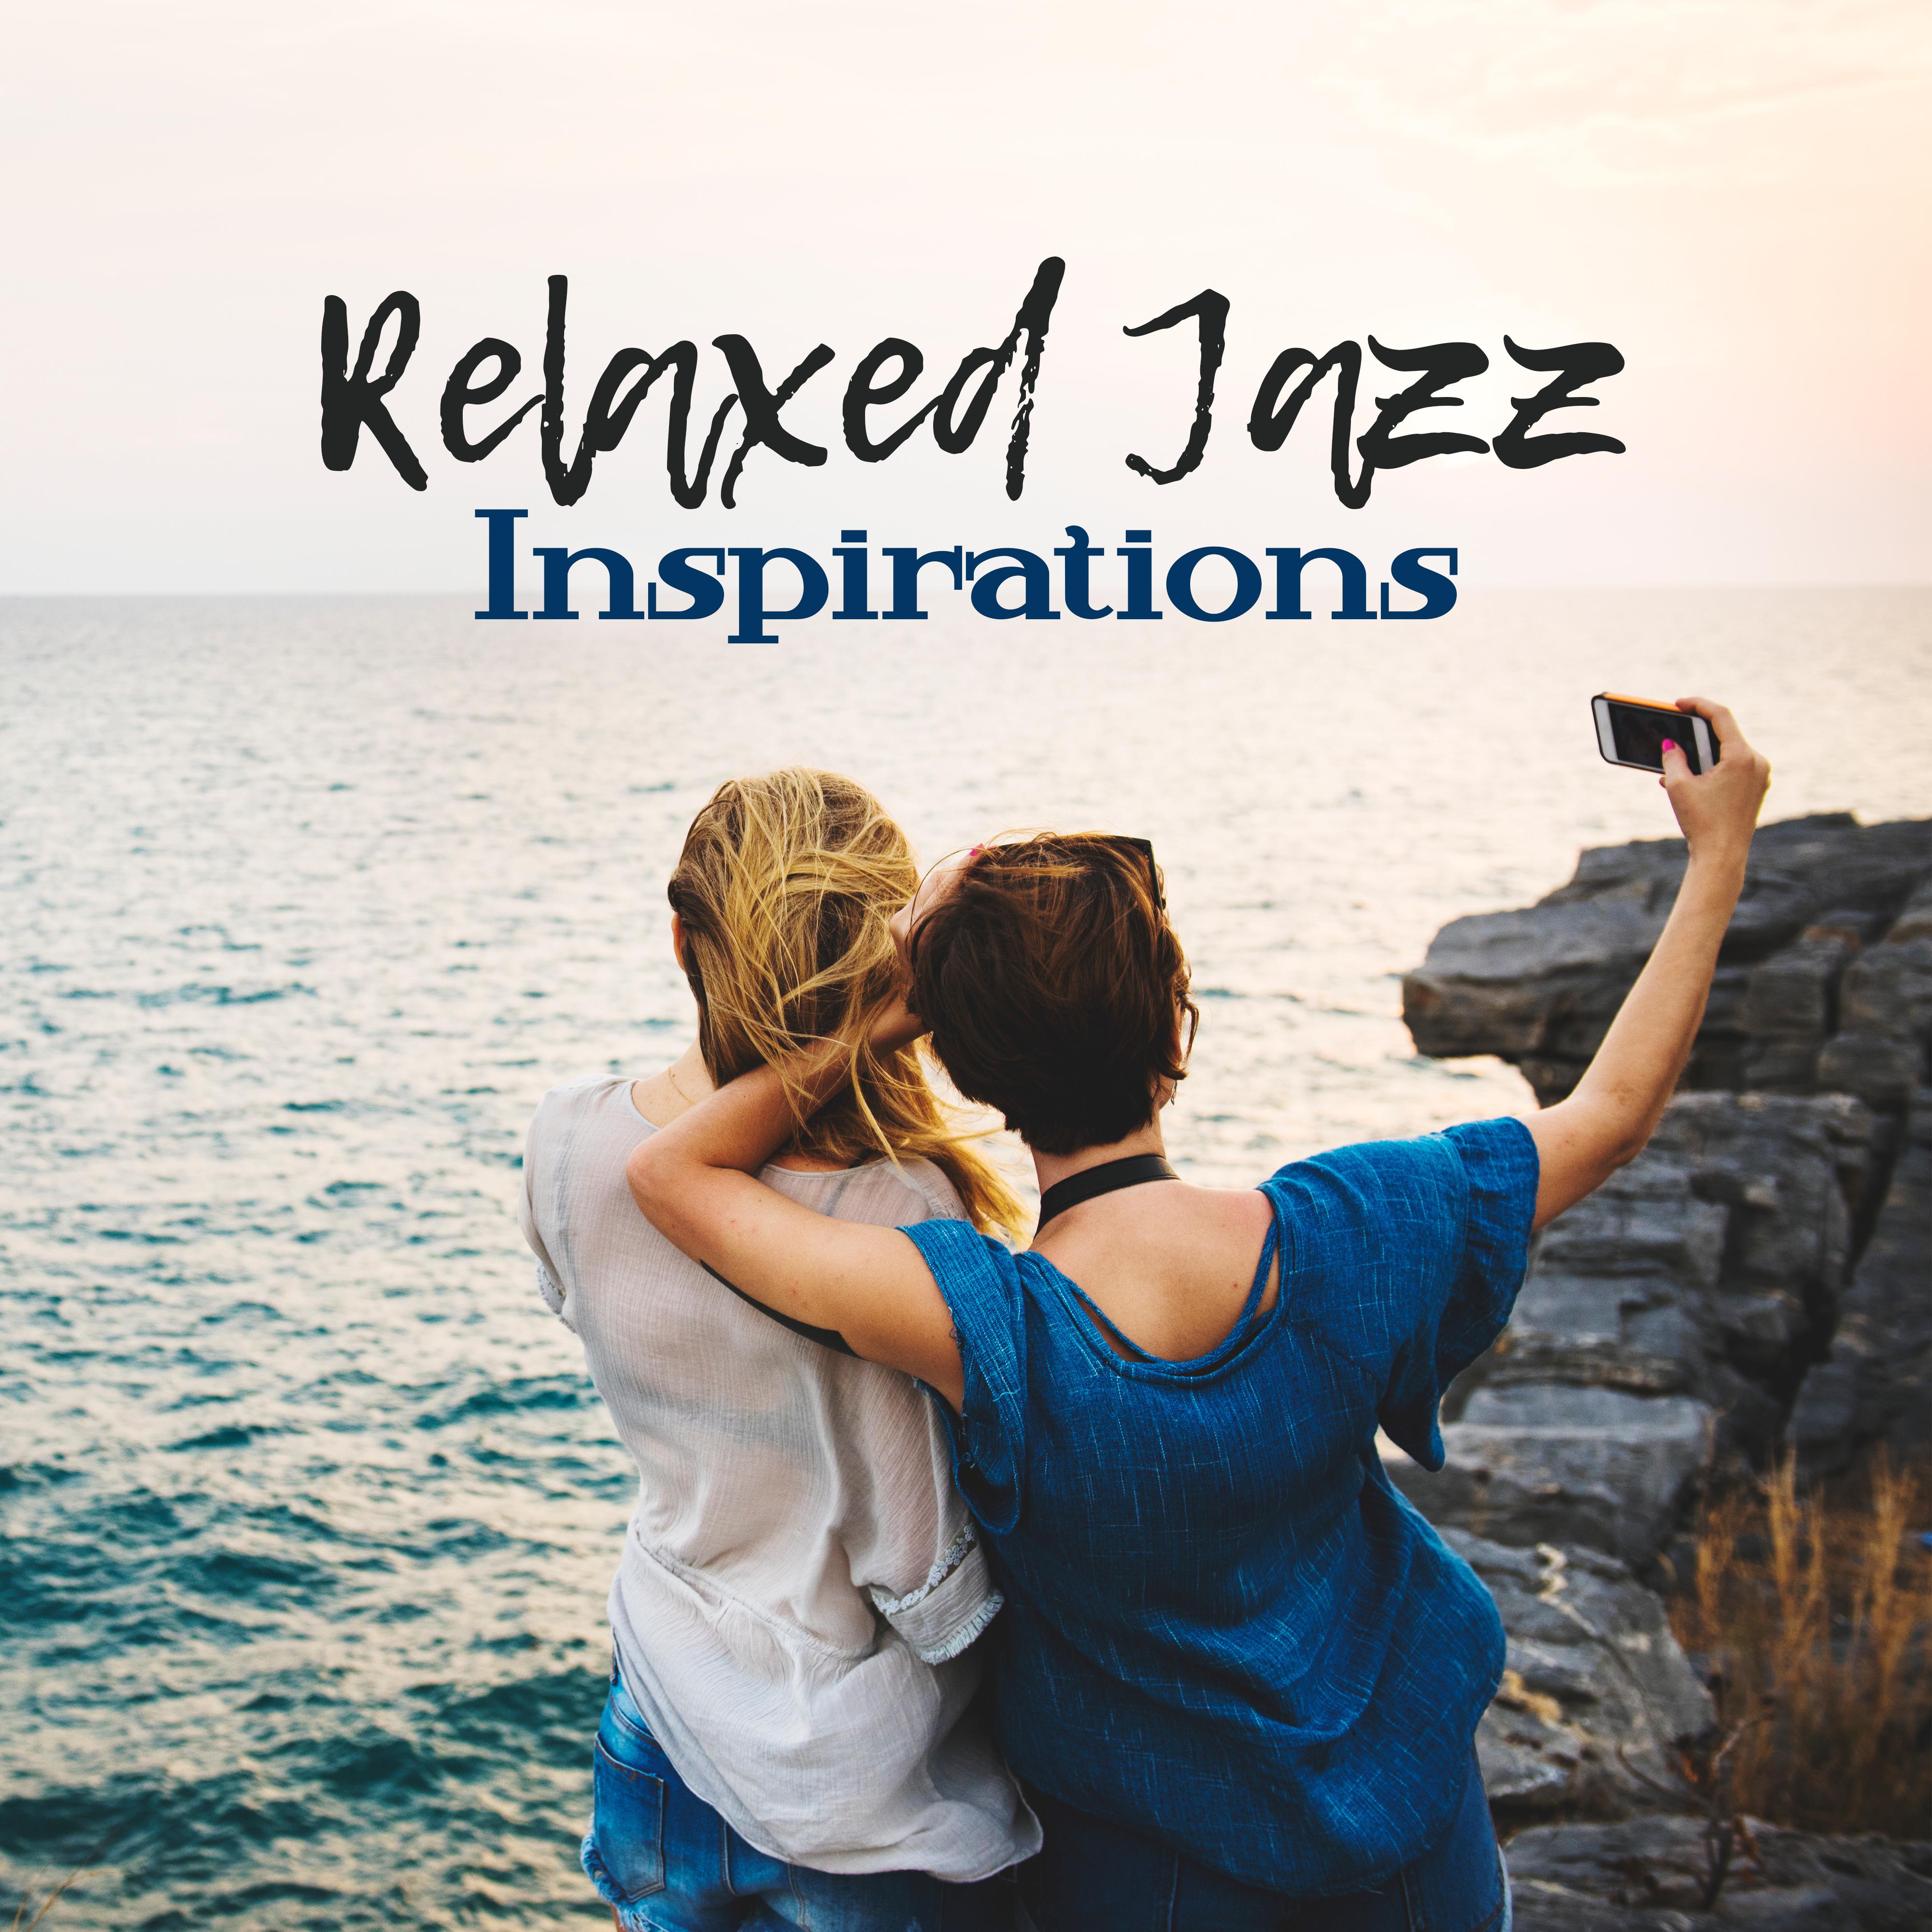 Relaxed Jazz Inspirations – Calm Piano Music, Smooth Jazz, Relaxing Music 2017, Ambient Instrumental